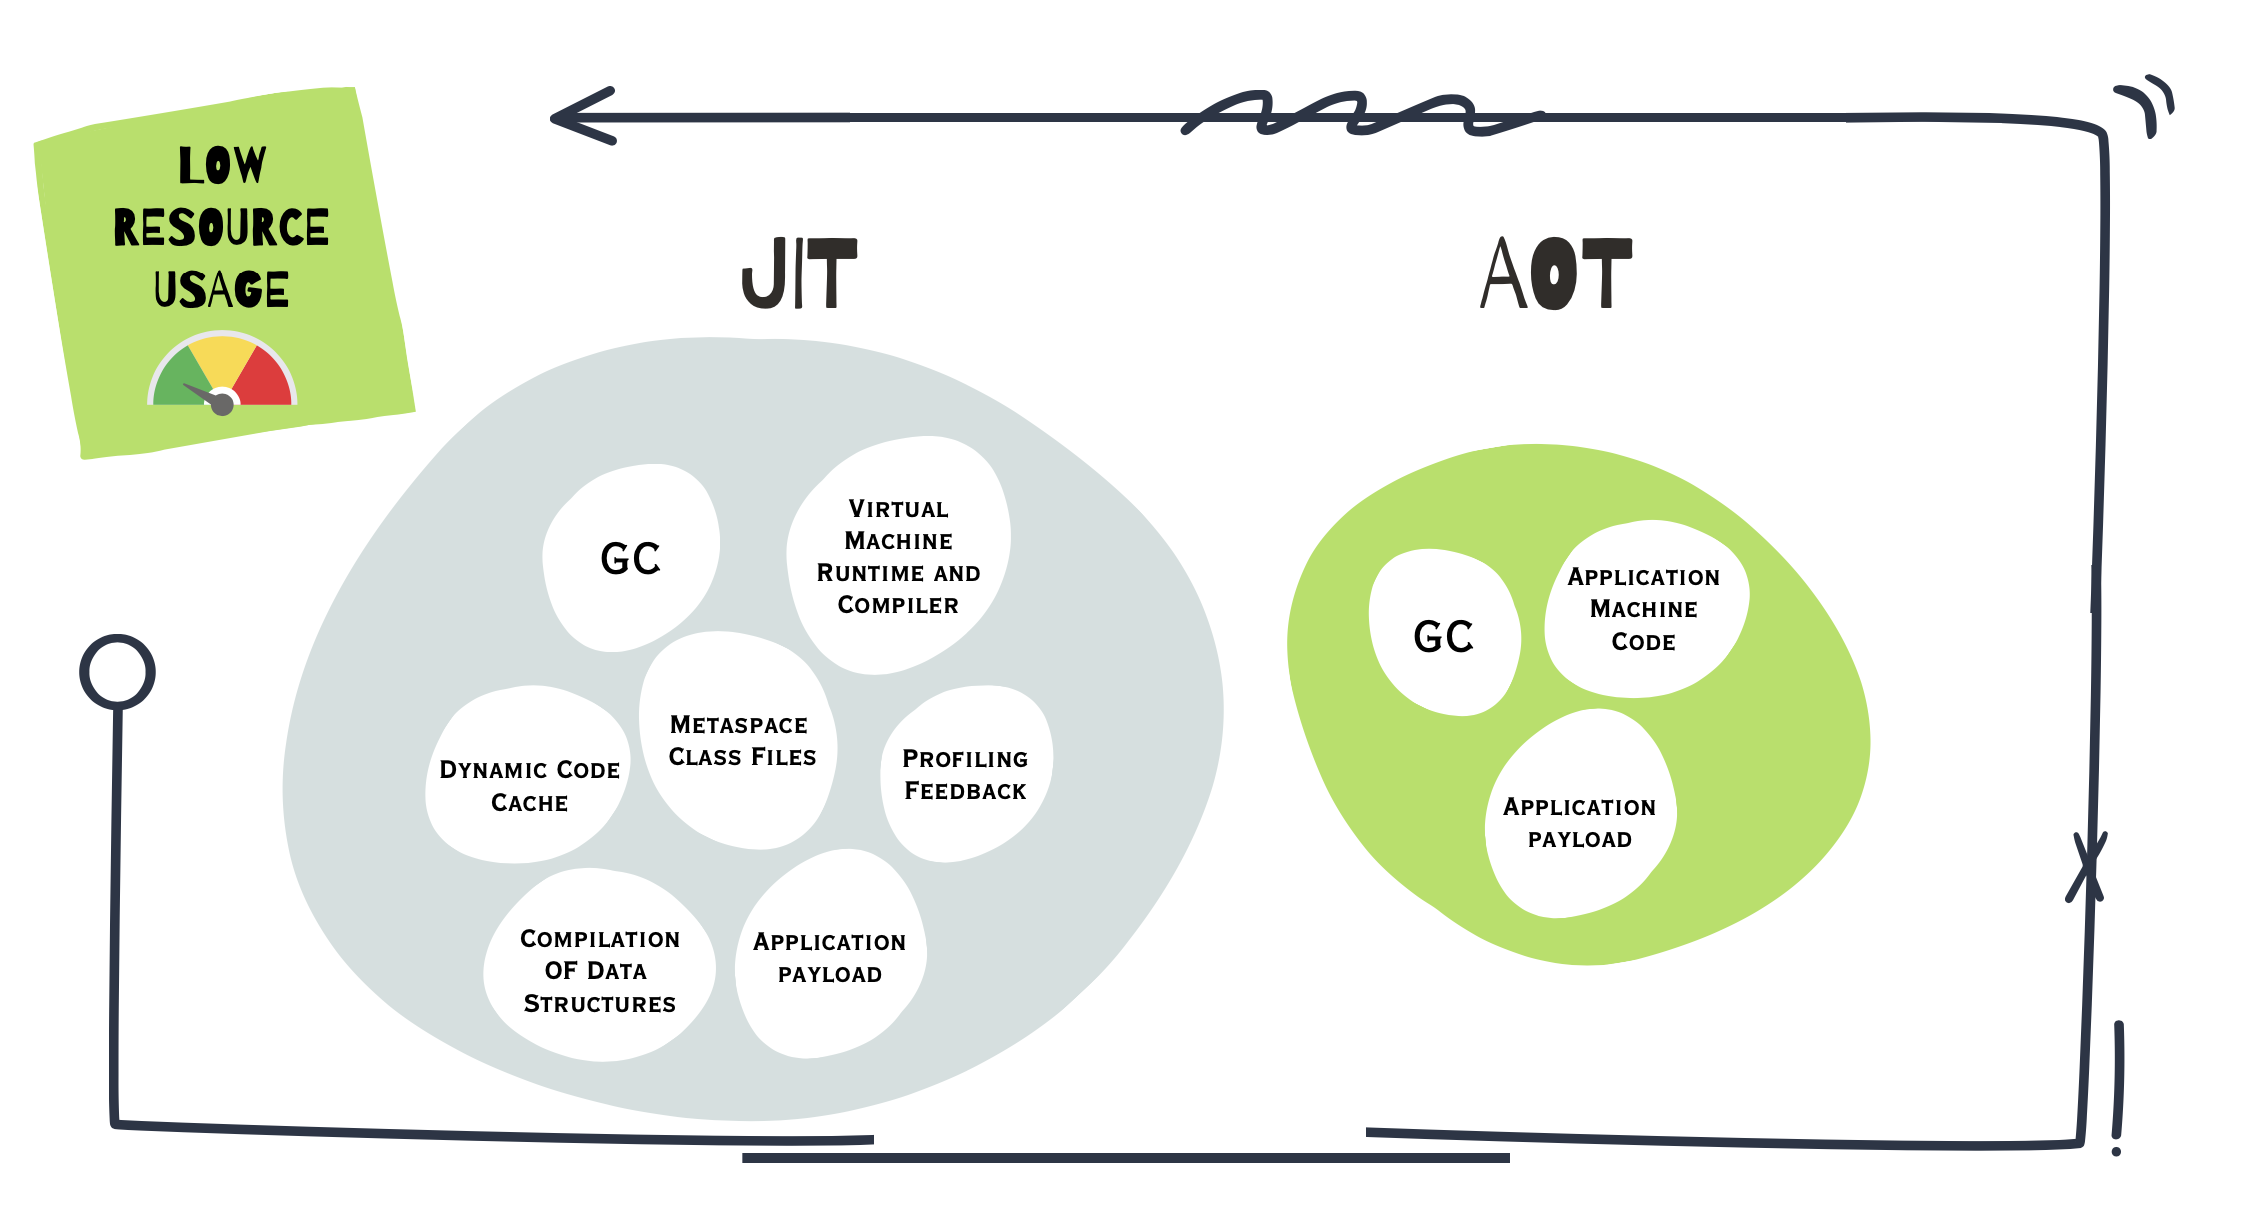 Efficiency in JIT and AOT